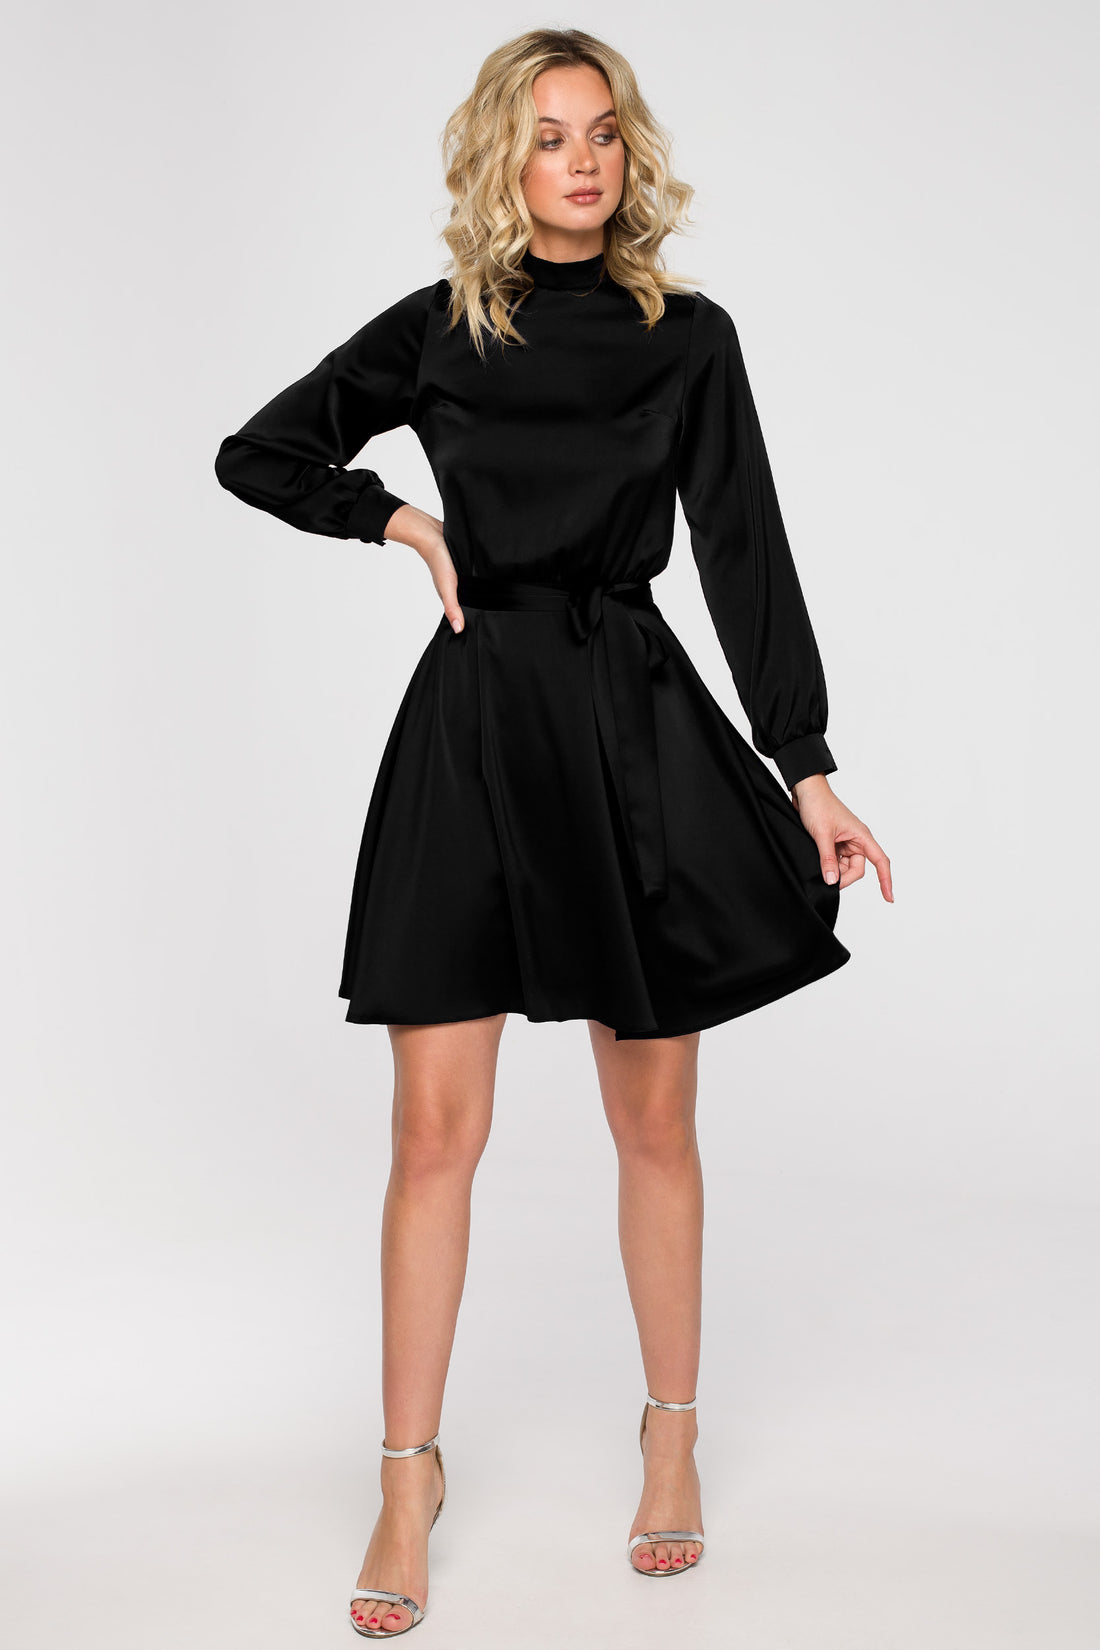 High-Neck Black Satin Mini Dress Tie Detail | Strictly In | Make a statement in our versatile mini dress with a high neck, flared cut, and bishop sleeves. Perfect for turning heads at festive gatherings.